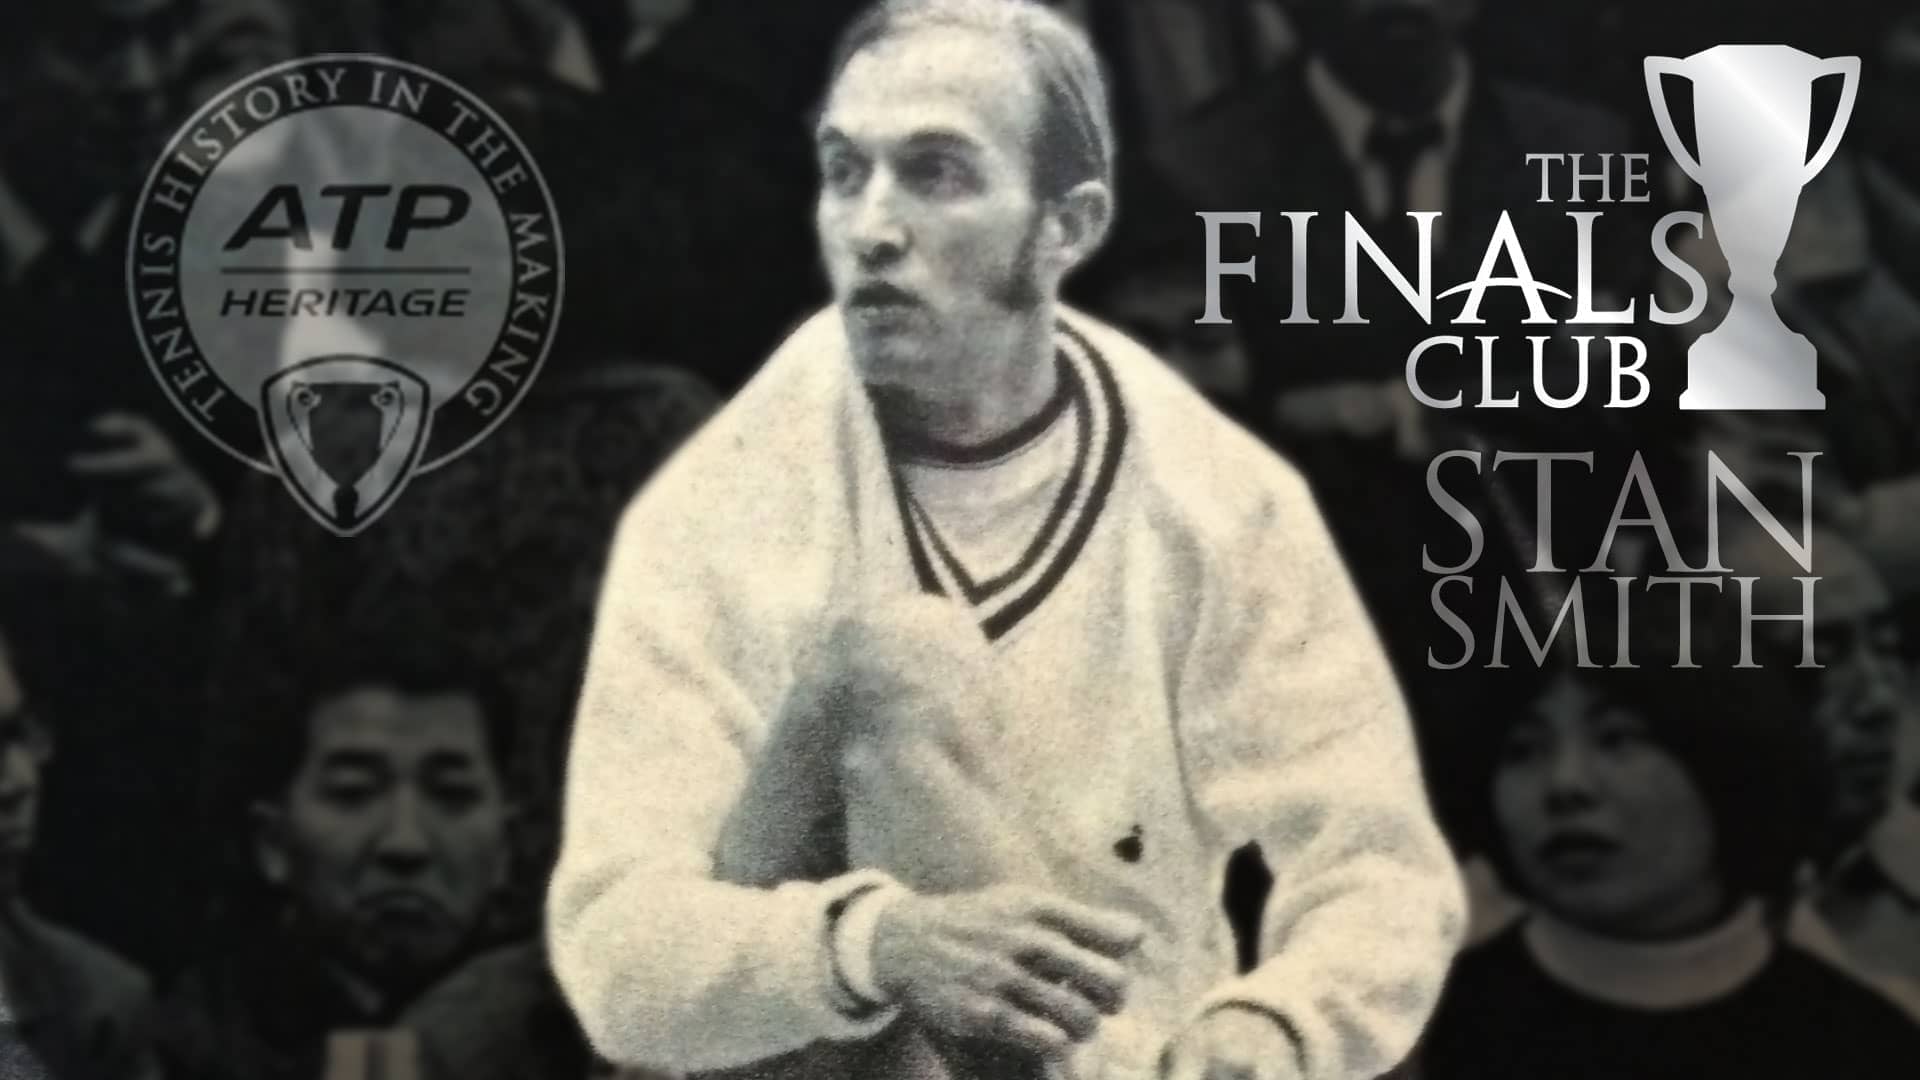 Stan Smith won the singles and doubles titles at the first year-end championships at Tokyo in 1970.